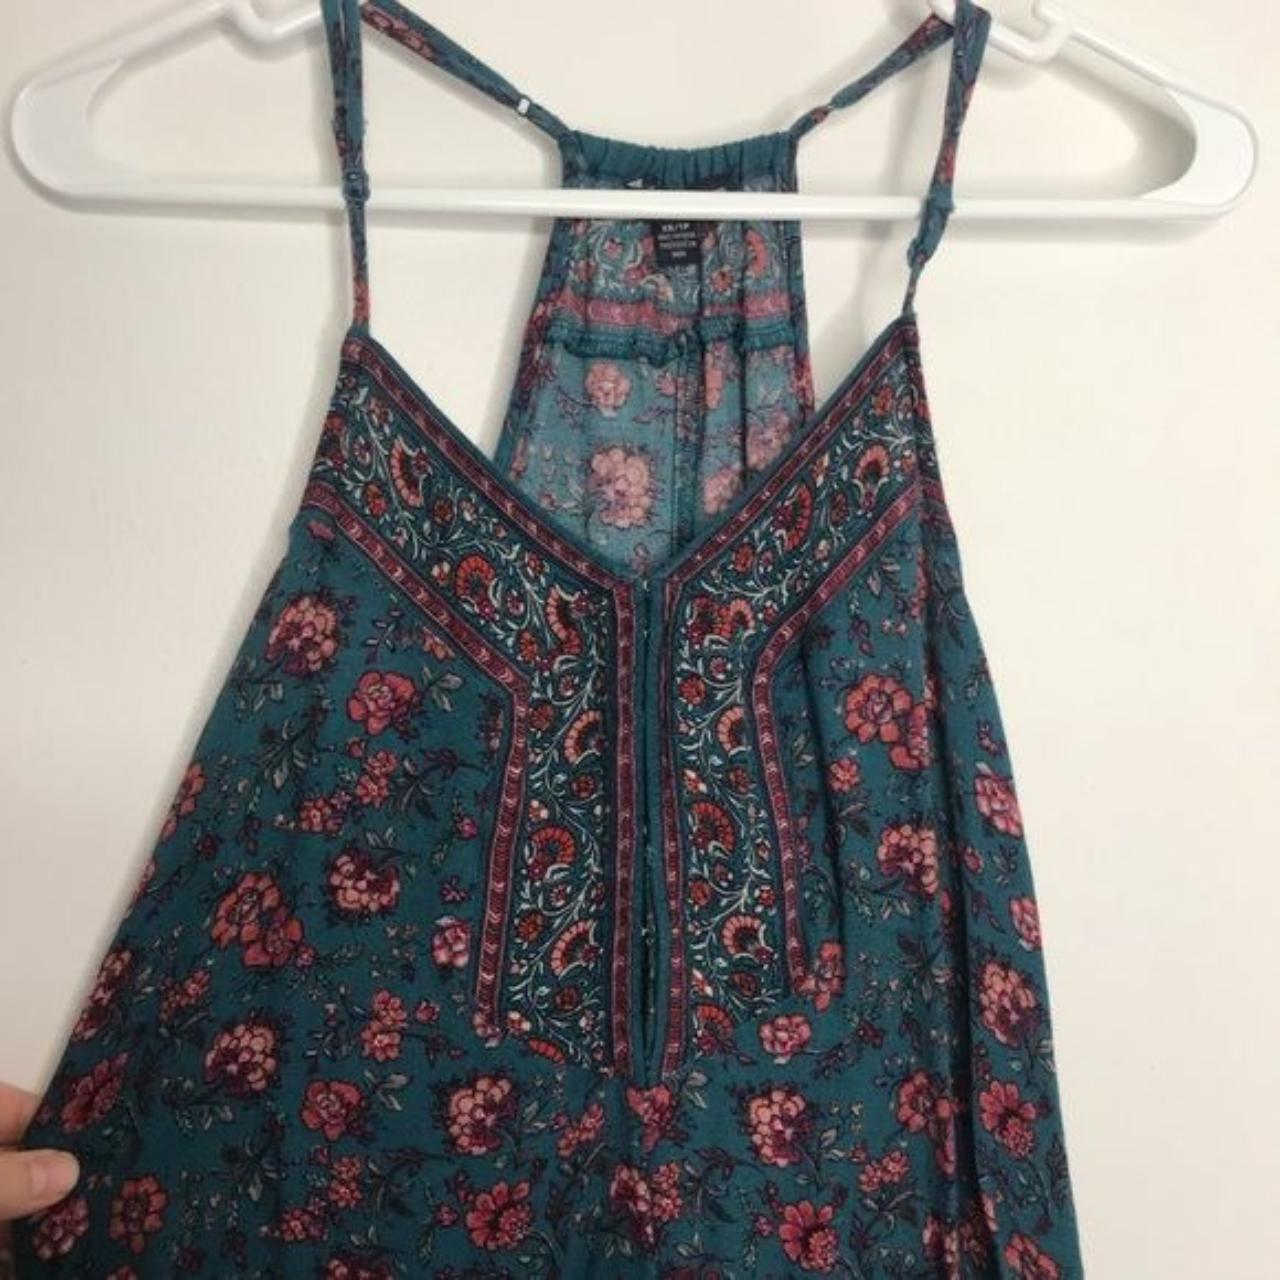 Product Image 3 - American Eagle Floral Shift Dress
Size